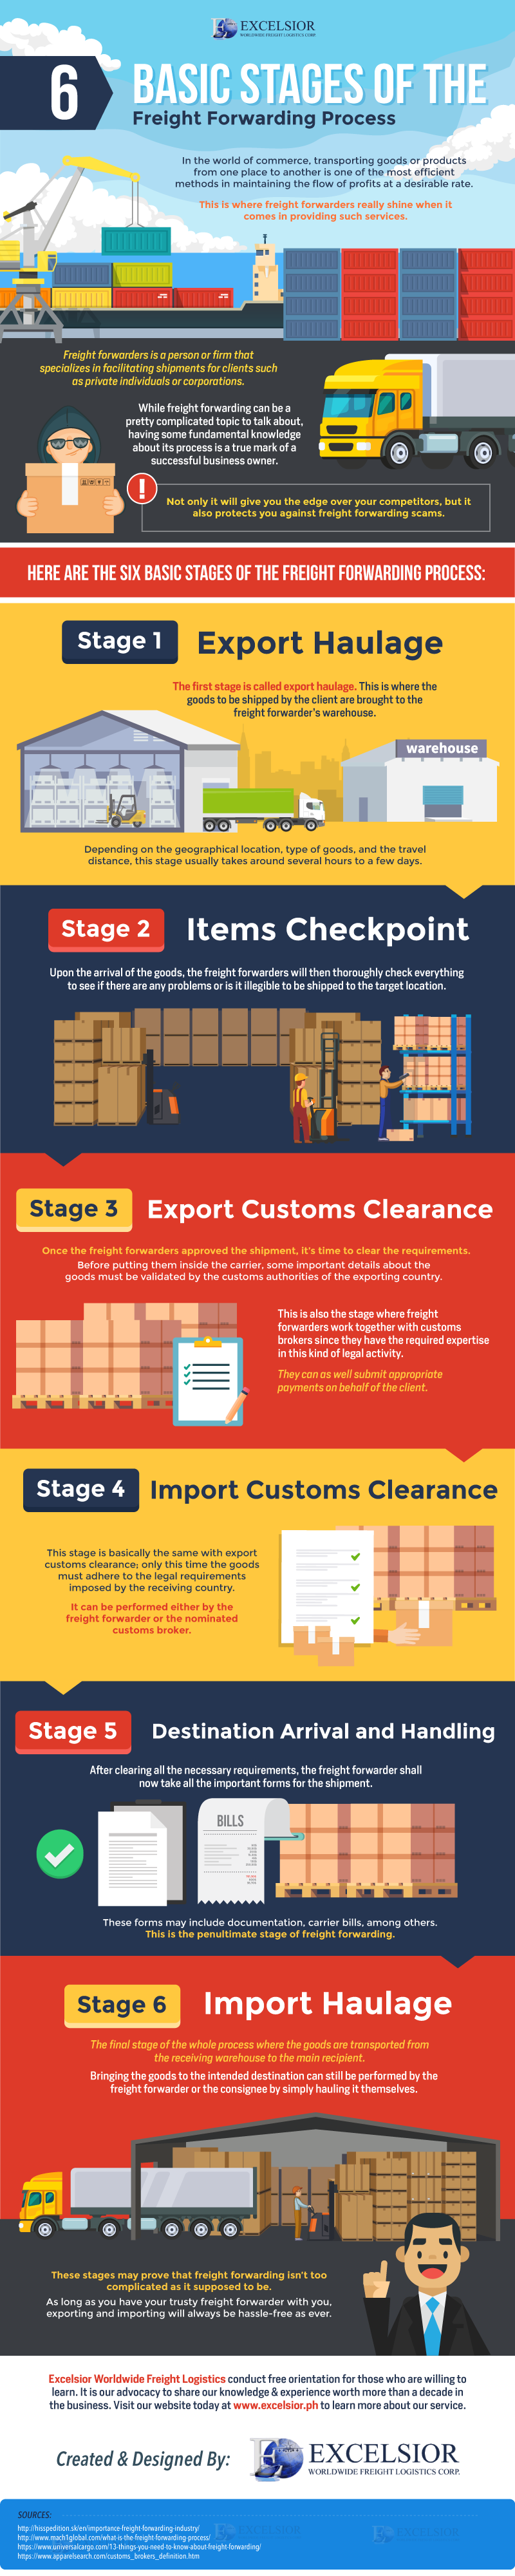 6 Basic Stages of the Freight Forwarding Process - Infographic